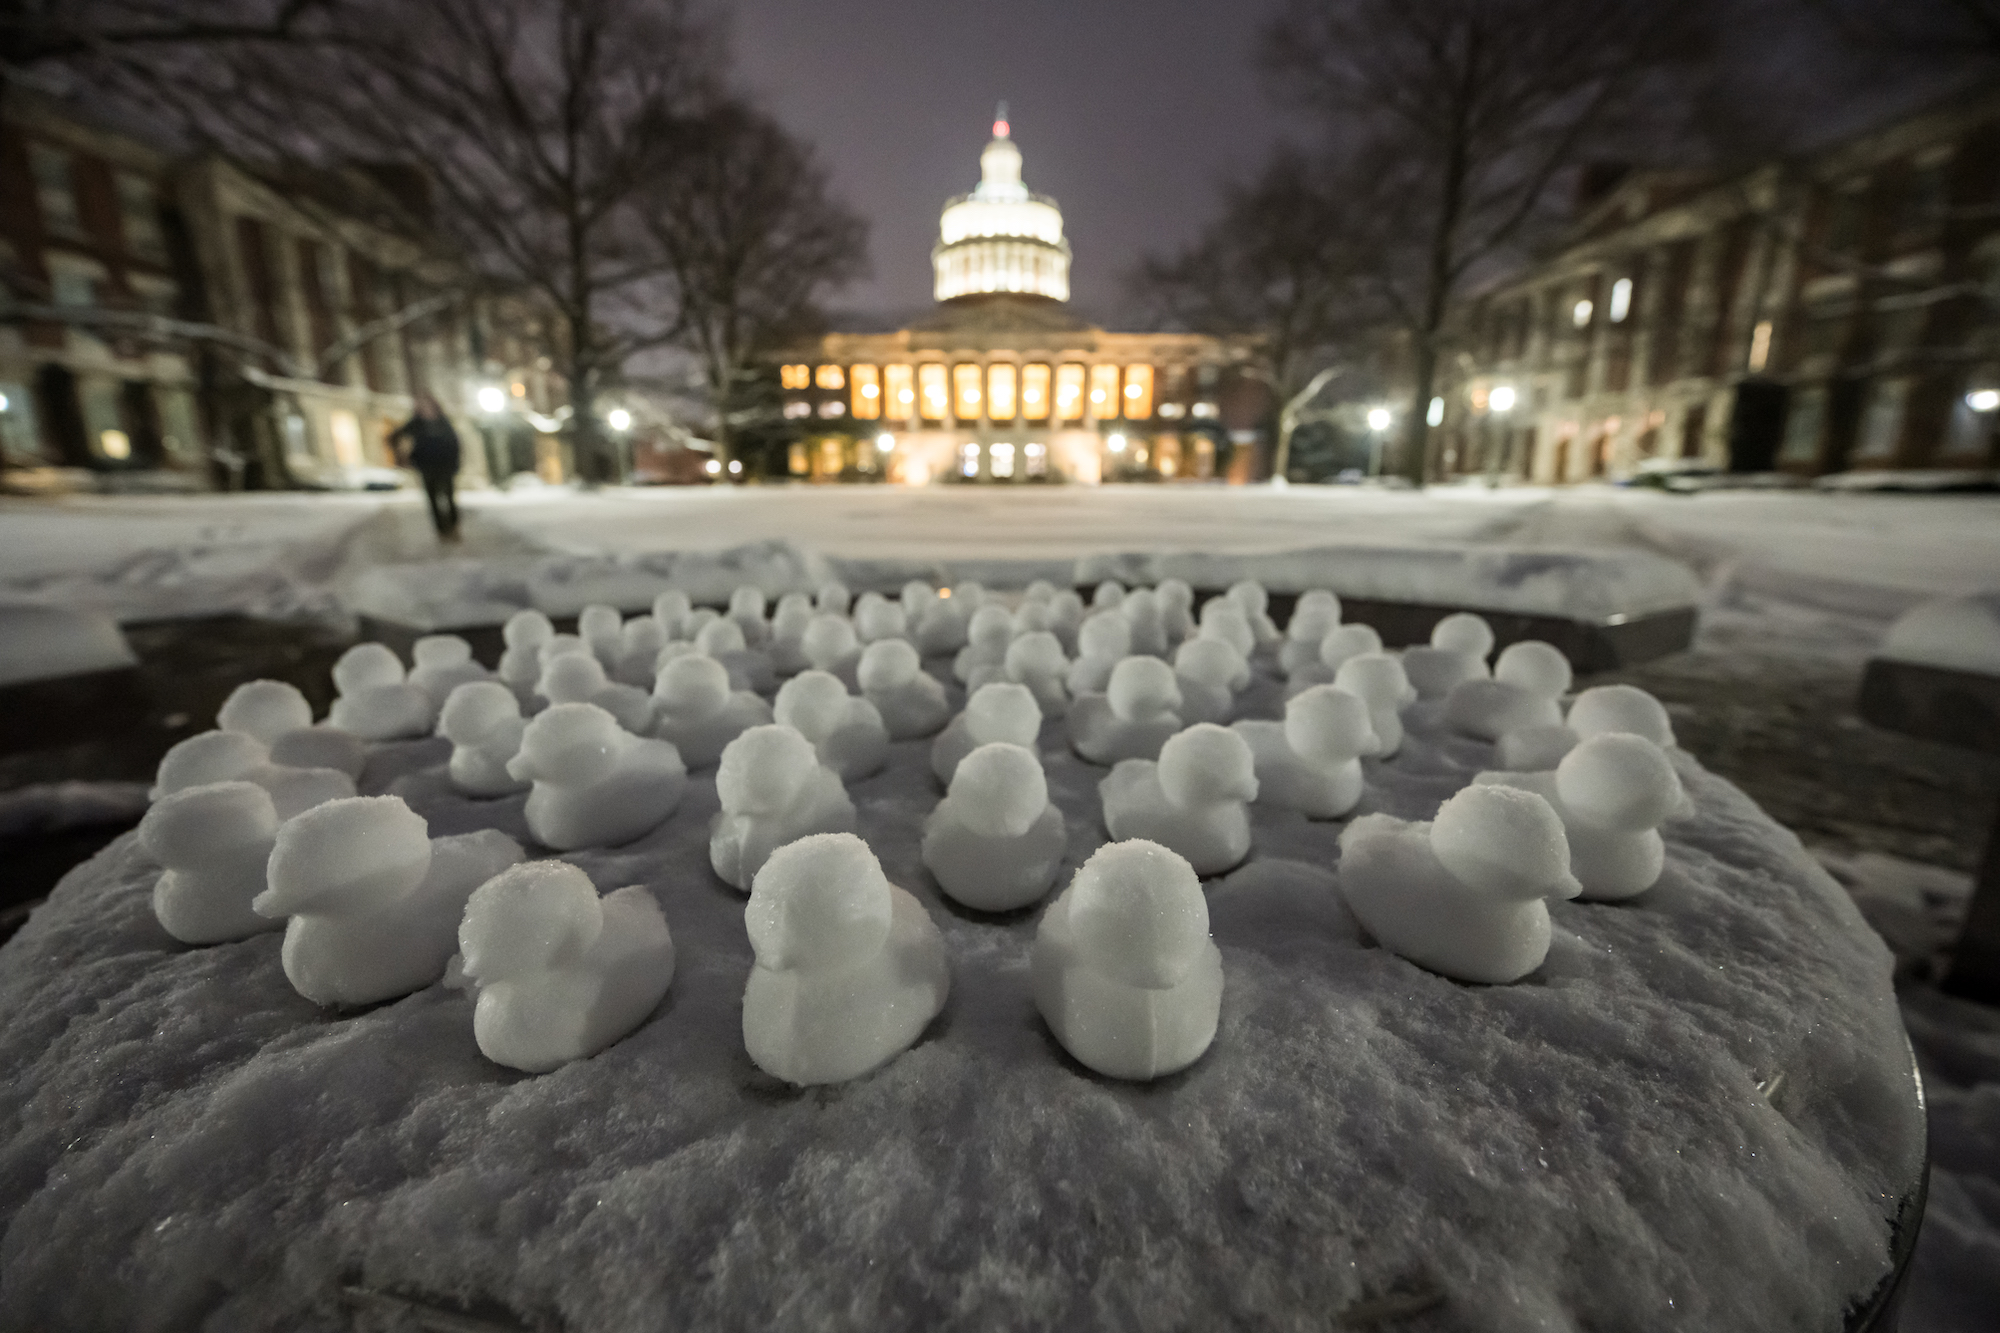 Dozens of ducks made out of snow are illuminated by outdoor lighting on a snowy quad